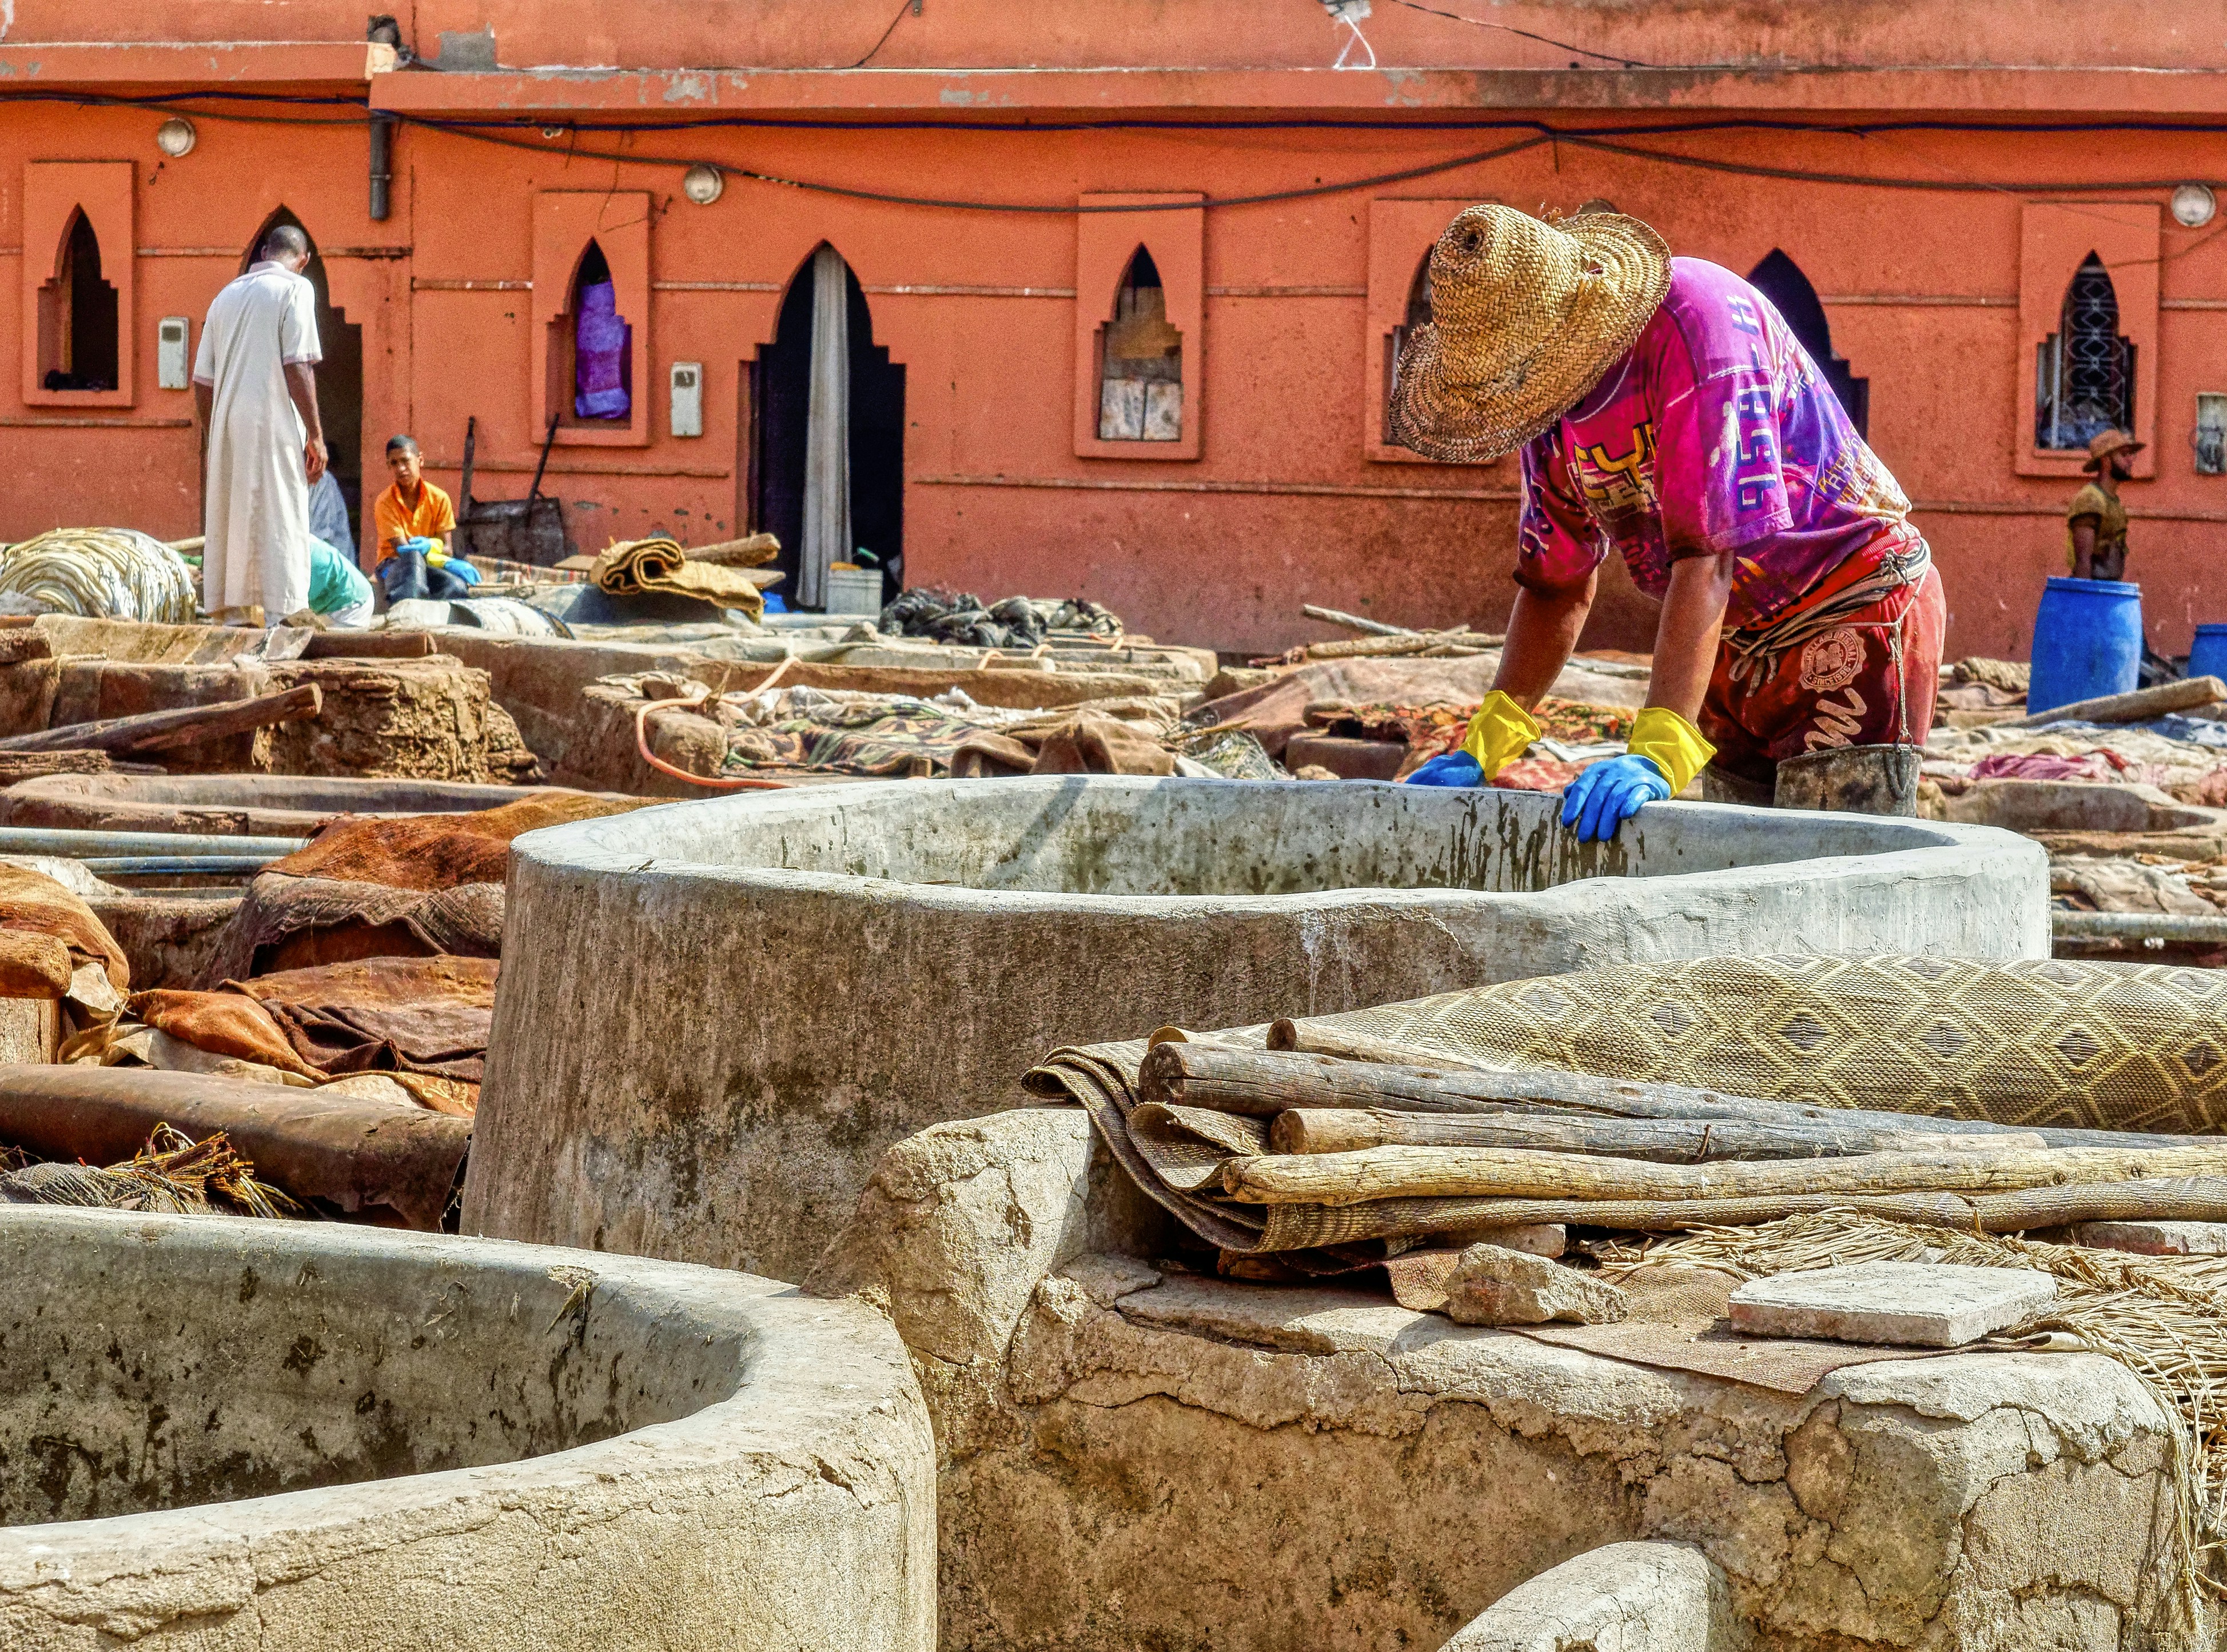 Worker at a tannery in Morocco.</p>
<p>A visit to a Moroccan tannery is not only a visual impression that stays, also the smell is unforgettable. The procedure of making leather has not changed much over the last decades and even centuries, neither have the working conditions, we were told. In Marrakesh the tannery is an enterprise run by about 50 families. The reputation of Moroccan leather was so great that the French word \” style=”max-width:400px;float:left;padding:10px 10px 10px 0px;border:0px;”>”I havenevermet any substantial opposition from the opposite sex. I think her opposition had more to do with her generation and a variousmindset. Paradoxically, the only difficulty Images.Google.Tl we needed todeal with was from a seniorlady who didn’t believewomencould do this type of work. In reality, on the whole all the tradesmen I have actuallycome into contact with have actually been extremelyencouraging.</p>
<p>The online search engines can be used for this function, so Googling the company’s name or the person’s name may net you a fewreviews about the subject. Look into the deal and the backgrounds of the person/company offering it. You can utilize this review to learn more about the person behind the Images.Google.Tl opportunity. Attempt to choosean opportunity through an online jobwebsite, in this way you will have some type of defenseneed to the purchaserdecide not to pay you for your work.</p>
<p>Nevertheless, throughout the very firsttwo days at 3600m elevation in Lhasa you do not wish toeat. For each movement you need toencourage yourself. Overnight you require yourself to consume and munch, since Images.Google.Tl you can not sleep anyway, and in the morning you return the food nearlyunblemished. This bottle assists a lot against the constant headache. So, we “persᥙaded” ourselves to choose the next trip. At altitudes above 4000m you acknowledgeextremelyplainly that the body is not rather in order. Nevertheless, it makes no sense, to prepare and pay for the tripand then to spend the days in Lhasa in bed. After that, headache is back. A great business principle. Inevery pharmacy and every hotel, there is oxygen from the helpful pressure bottle with 2 pipes for the nose. However, it is just great for a couple of minutes.</p>
<p>Ask a Monkey for assistance while enhancing him at the very same time, you make certain to get what you want. Their interest wanes and they will start getting bored quickly if they are not being made the center of attention. Monkey people like being the focal point. These individuals are very handy, however they merely hate to ask for aid. When it concerns requesting for aid, he will rather suffer in silence than ask for assistance.</p>
<p>Try to select an opportunity through an online job website, in this manner you will have some type of protection need to the buyer choose not to pay you for your work. You can use this evaluation to learn more about the individual behind the chance. The online search engines can be utilized for this function, so Googling the business’s name or the person’s name may net you a few reviews about the topic. Look into the deal and the backgrounds of the person/company offering it.</p>
<p>Now this person sports an attractive lungi and an excellentbigscowl which states “І like my job and  <a href=